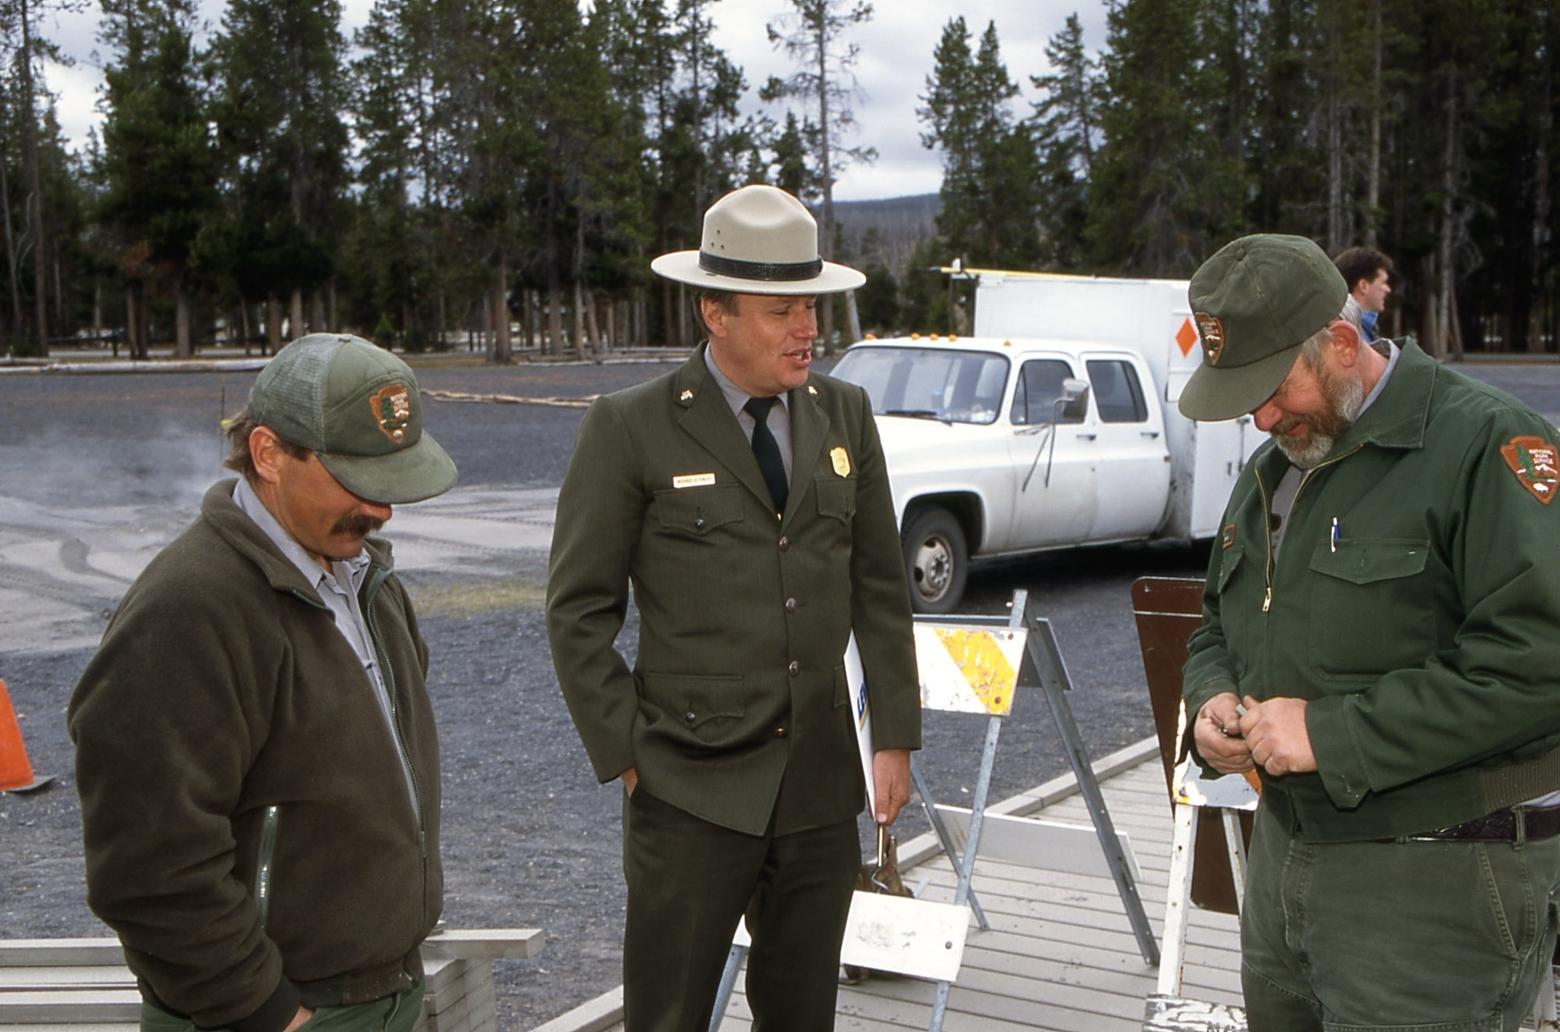 Paul Anderson, Mike Finley and Al Bowers on the new Unilever boardwalk at Old Faithful in Yellowstone, October 1996. Photo by Jim Peaco/NPS